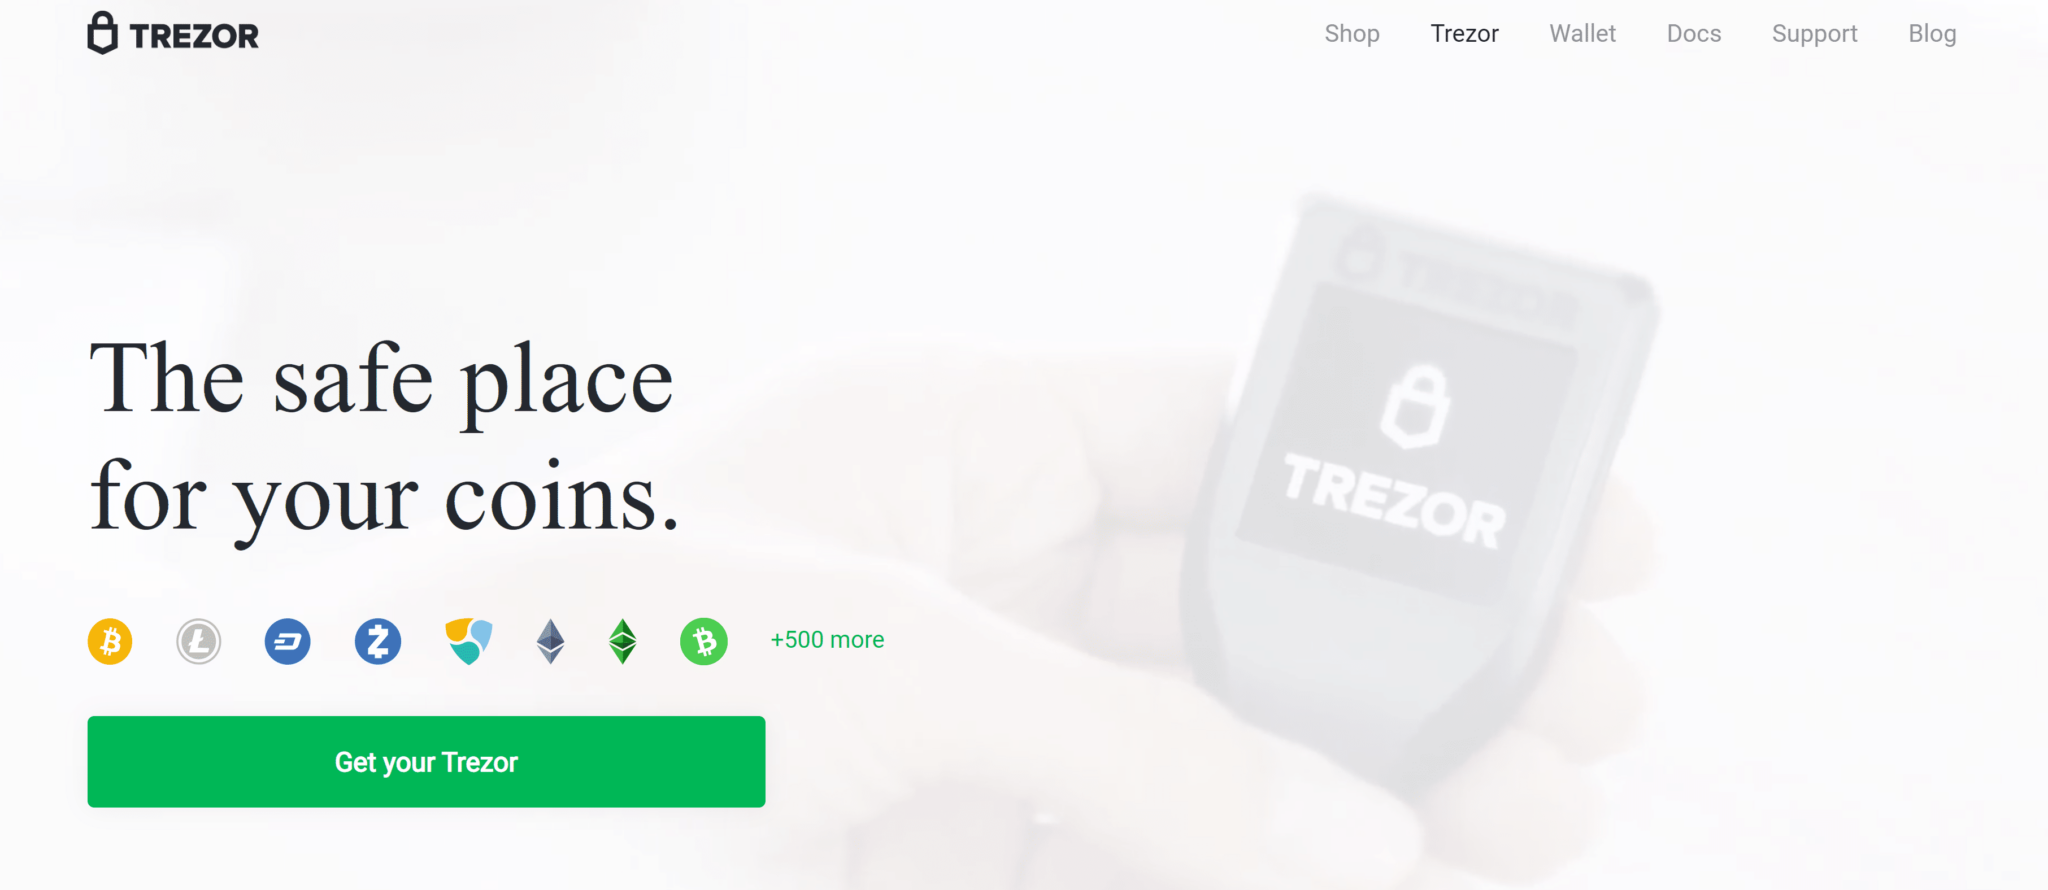 TREZOR vs Ledger: This screencap from the TREZOR website highlights the main goal for any hardware wallet: security